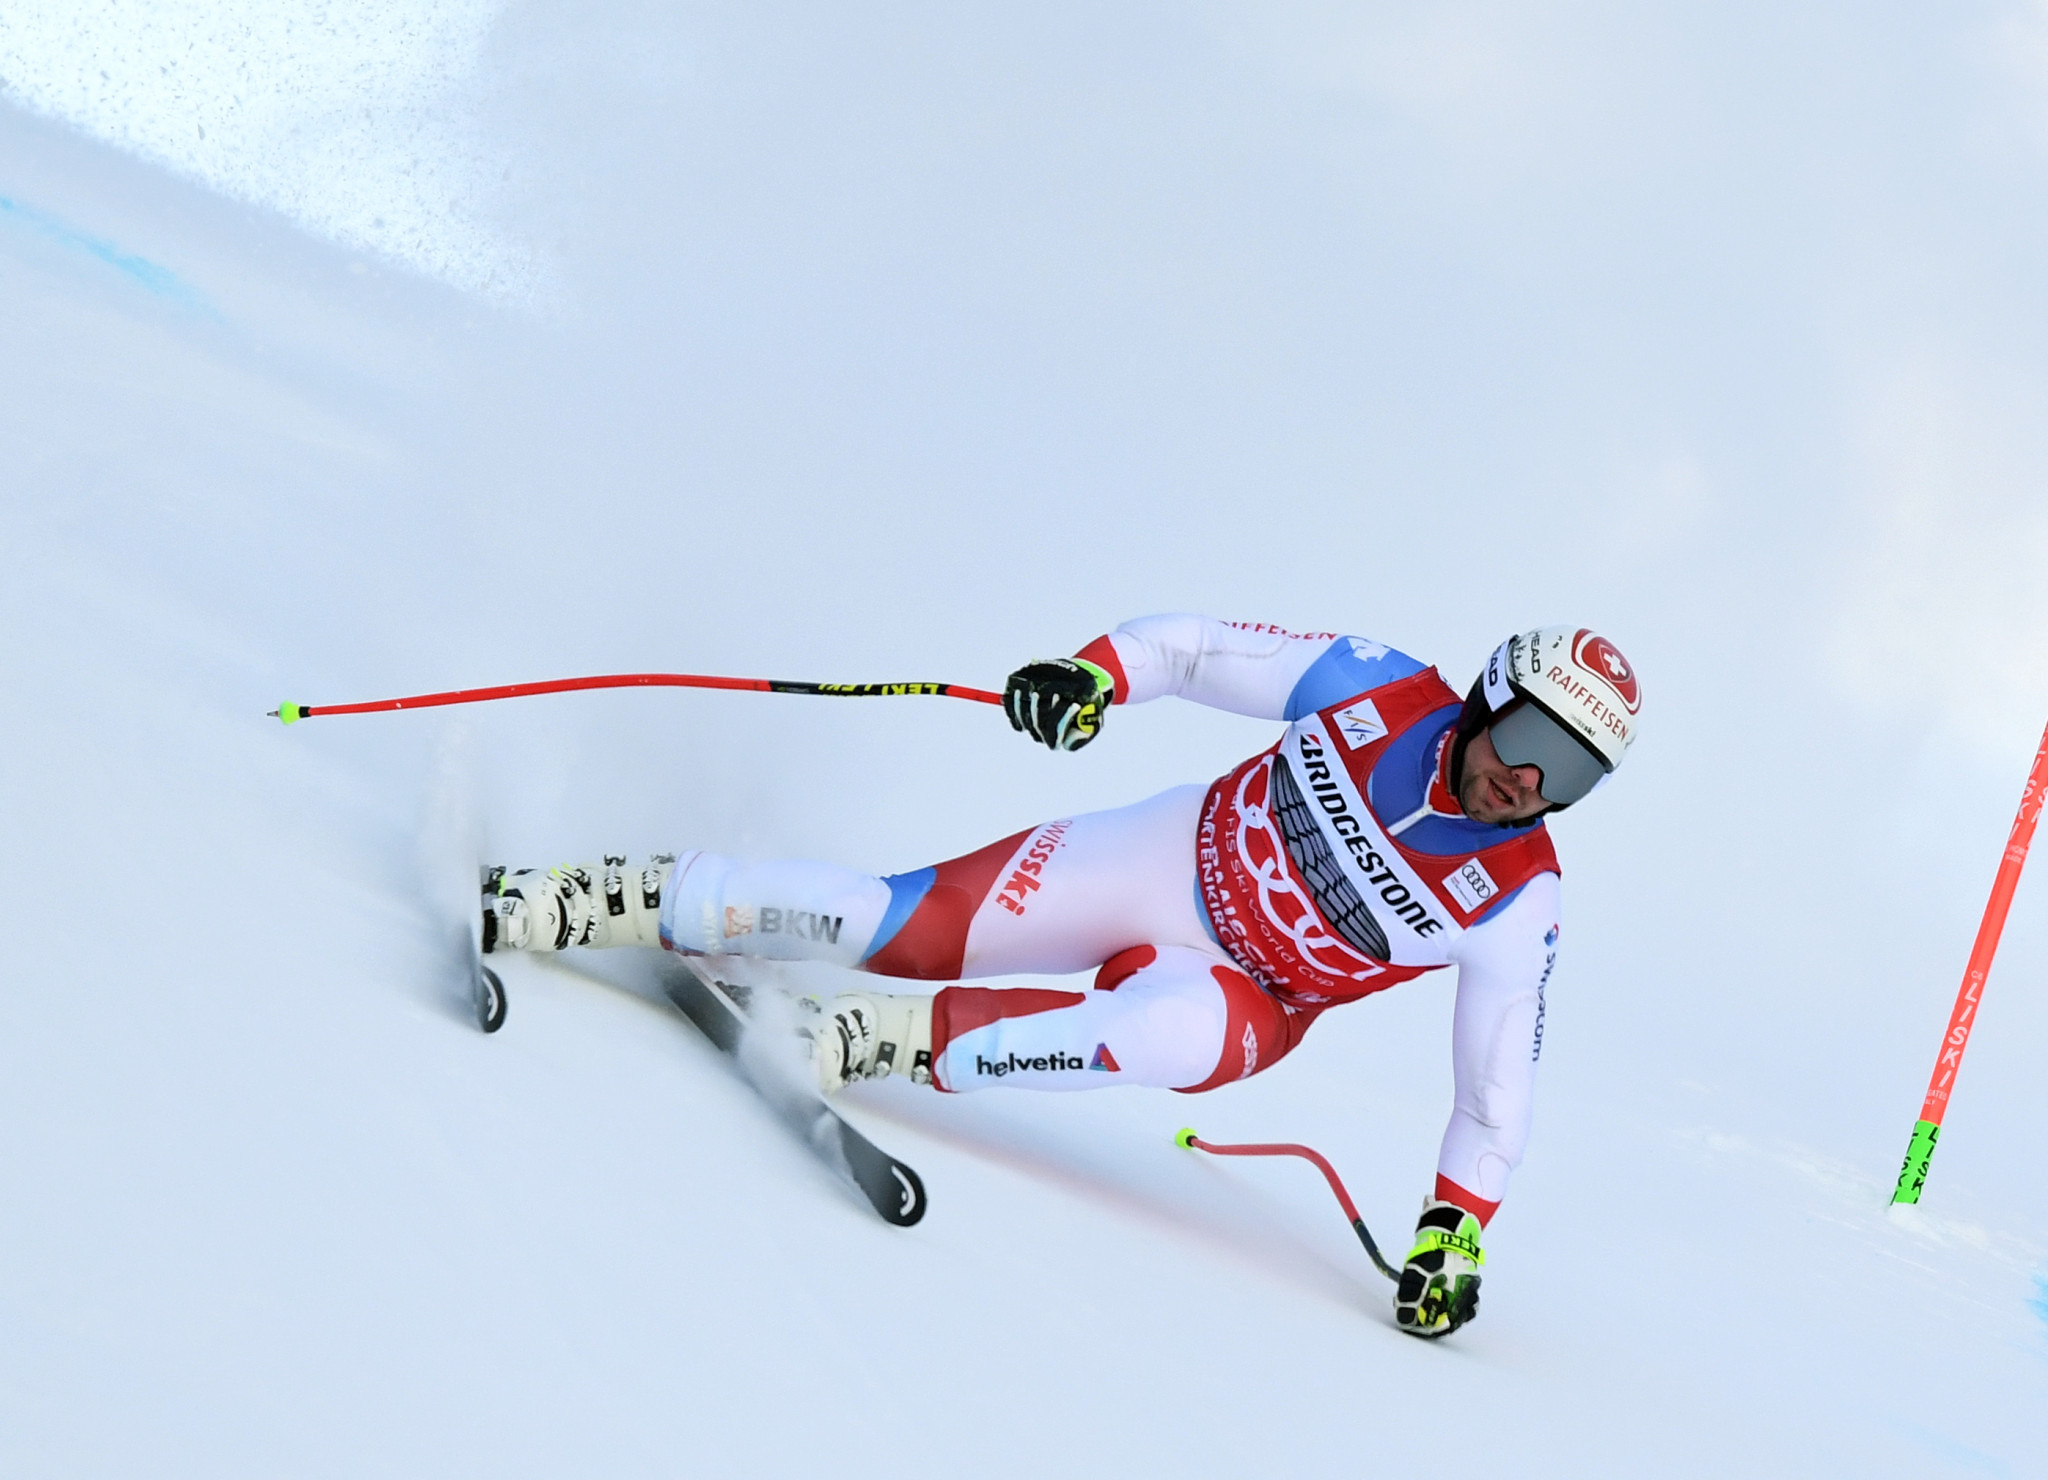  Beat Feuz tops the men's downhill standings but was beaten last time out by Italy's Dominik Paris ©Getty Images